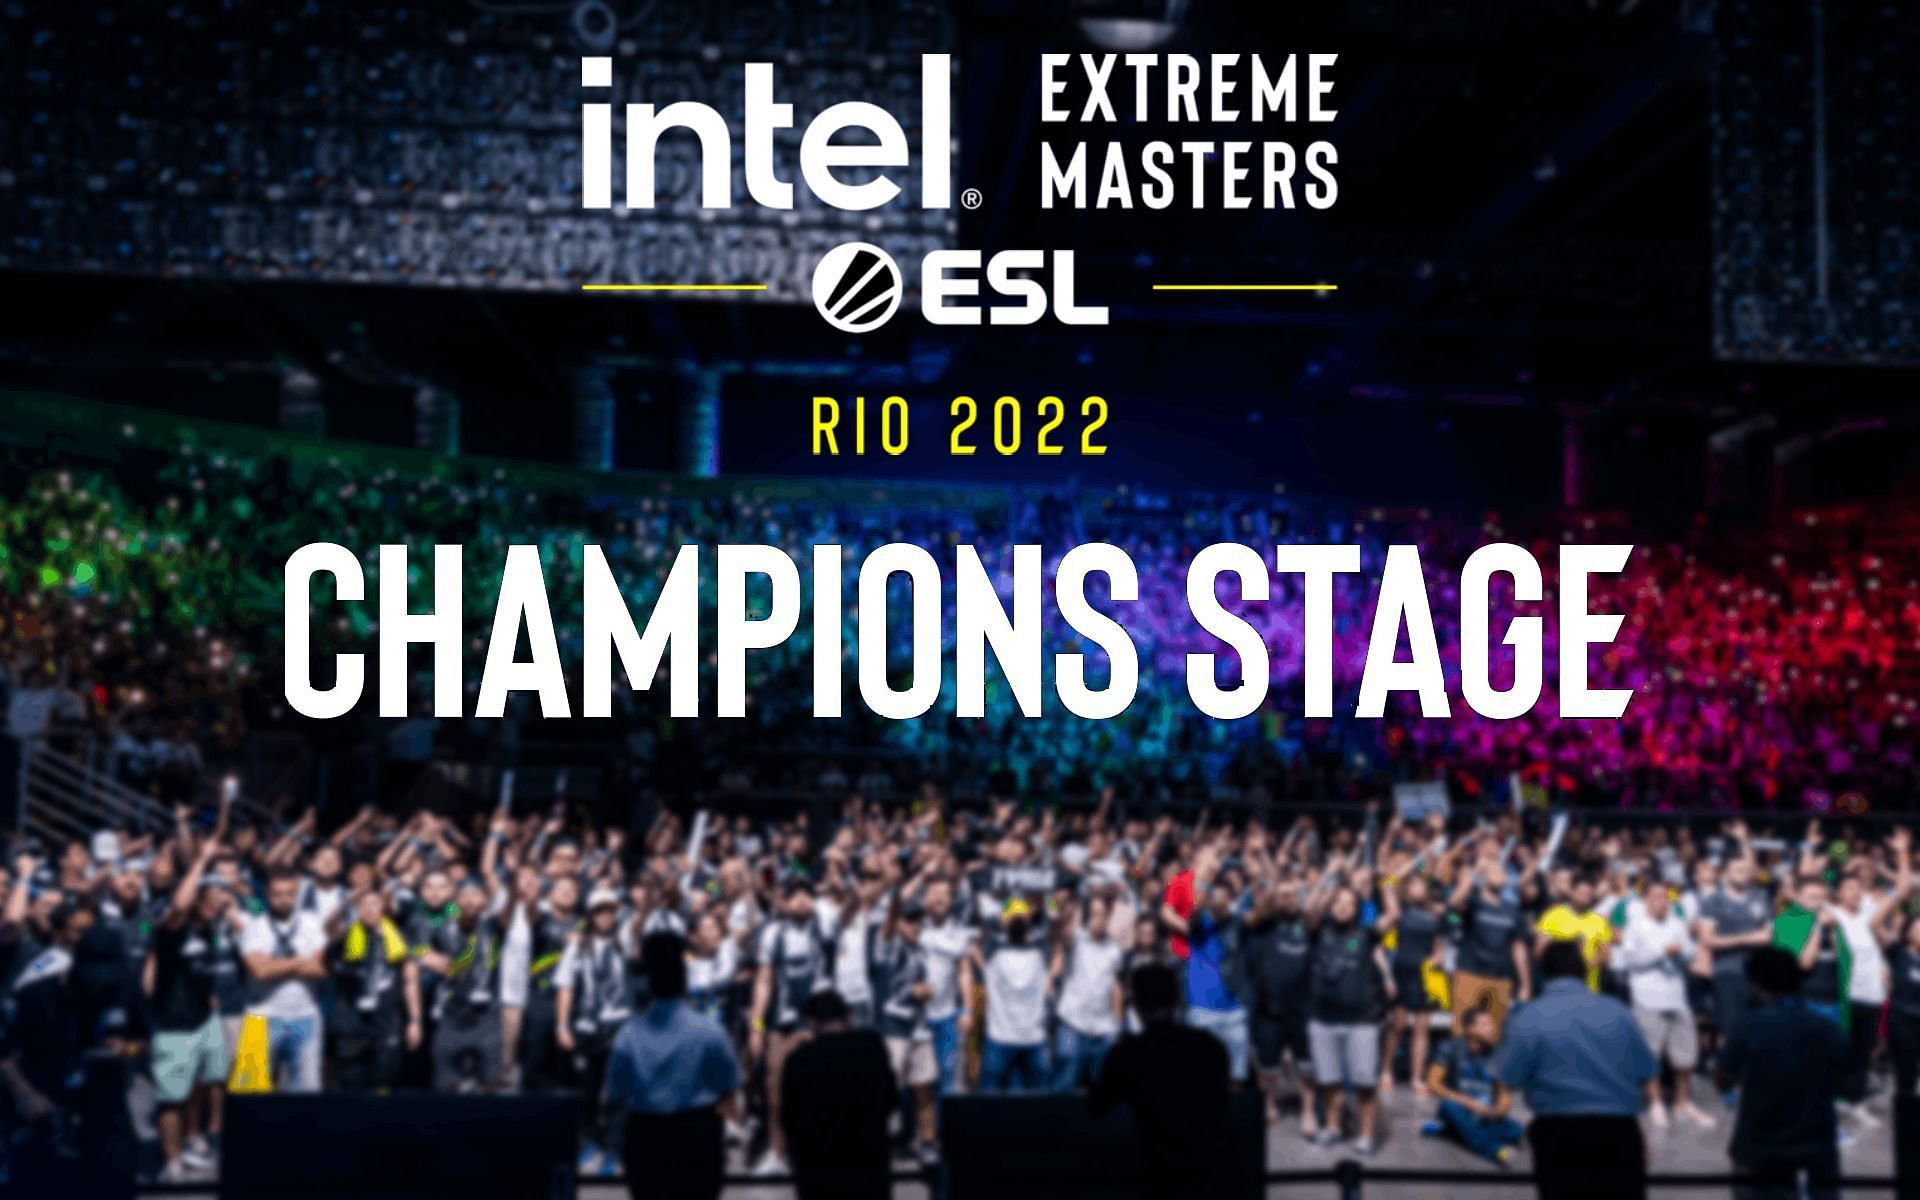 CSGO IEM Major Rio 2022 Champions Stage Schedule, teams, livestream details, and more